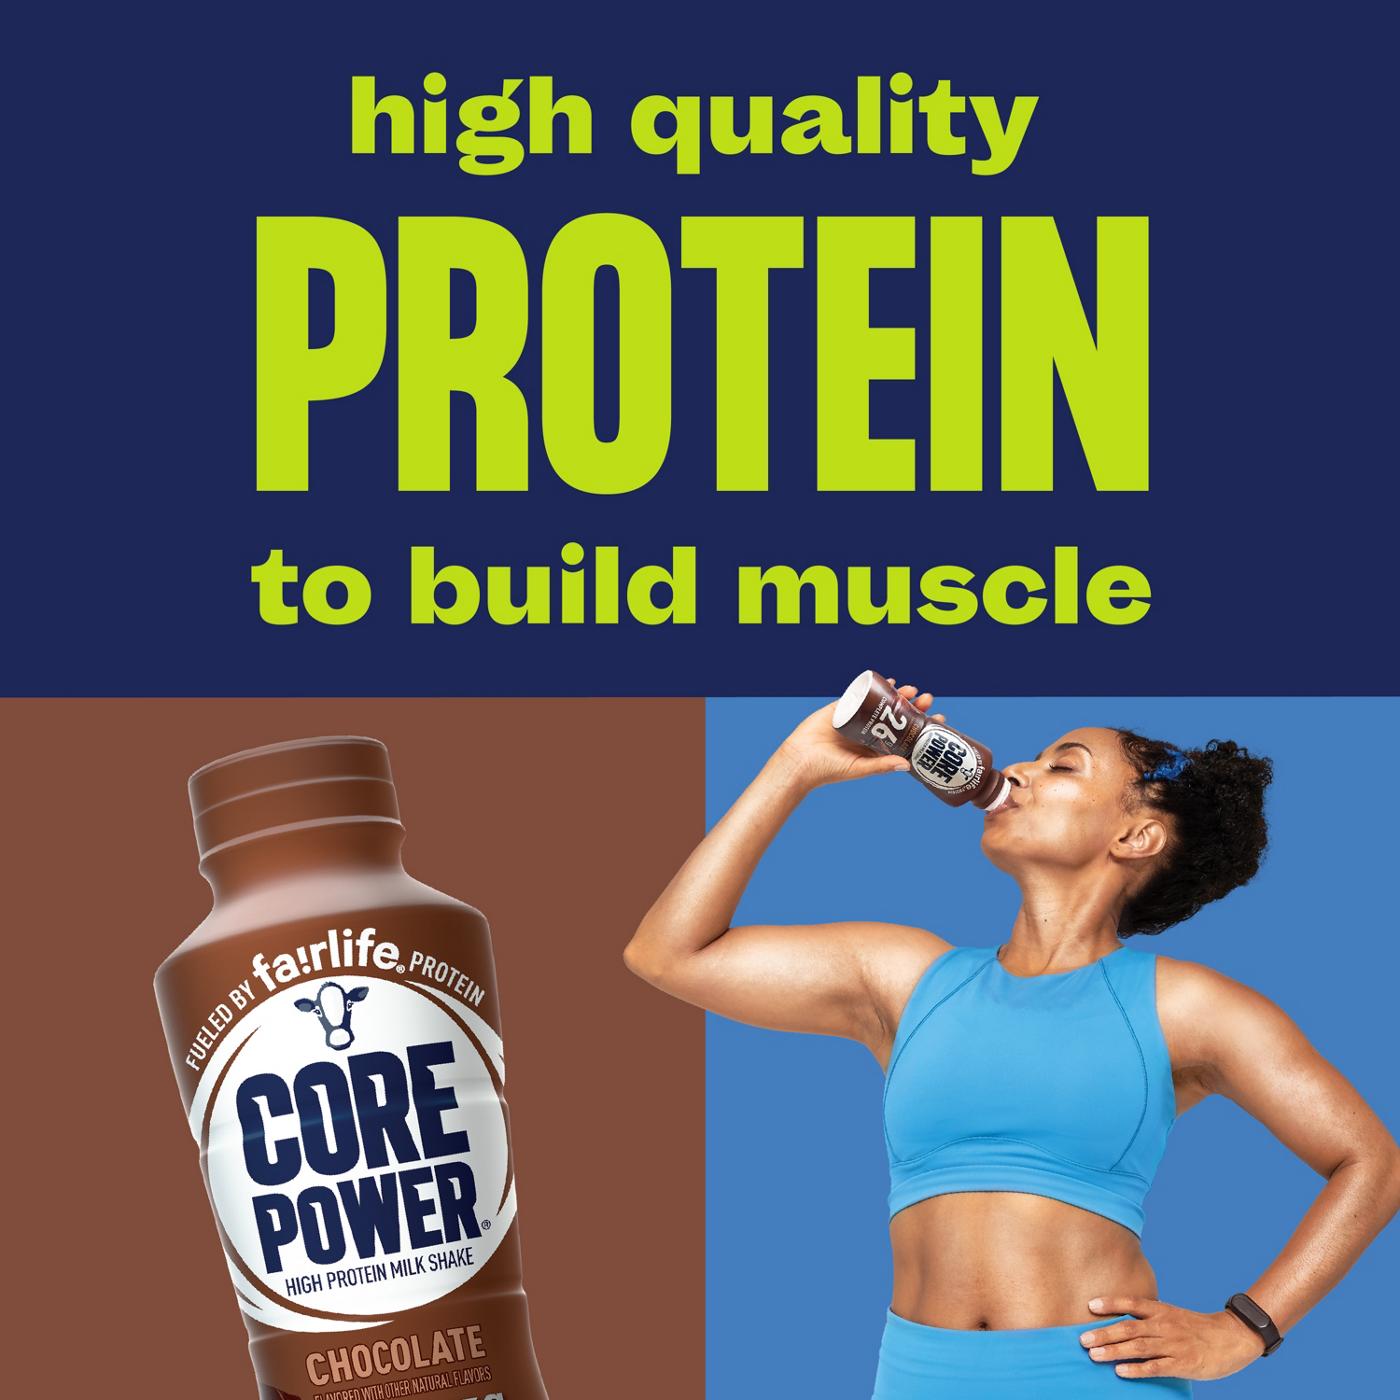 Core Power Complete 26g Protein Shakes - Chocolate, 12 Pk; image 5 of 7